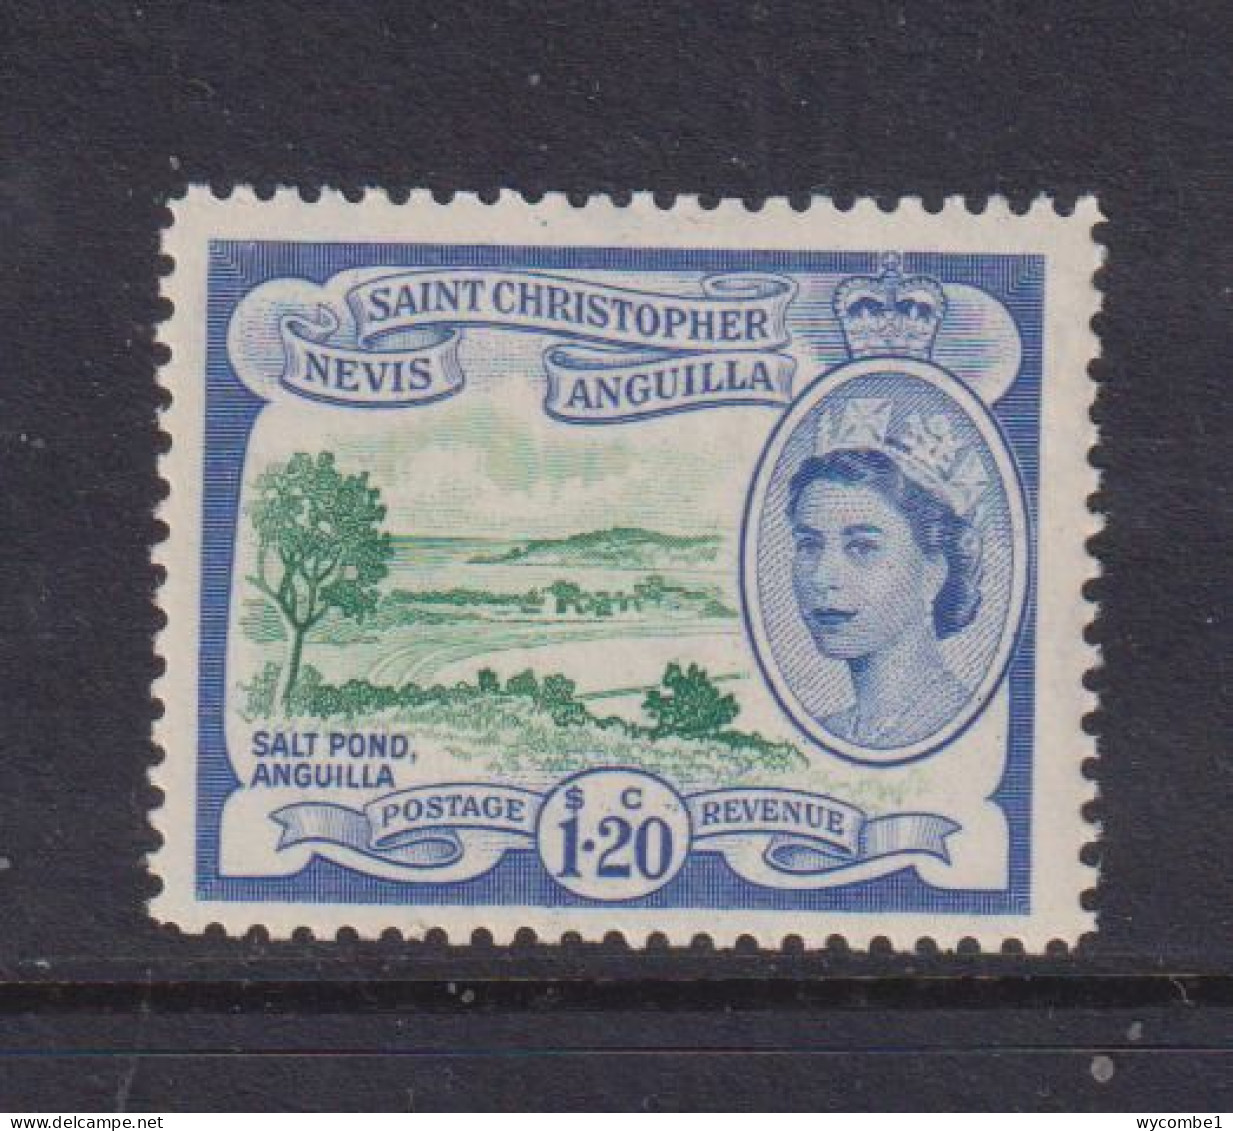 ST CHRISTOPHER NEVIS AND ANGUILLA - 1954  $1.20 Never Hinged Mint - St.Christopher-Nevis & Anguilla (...-1980)